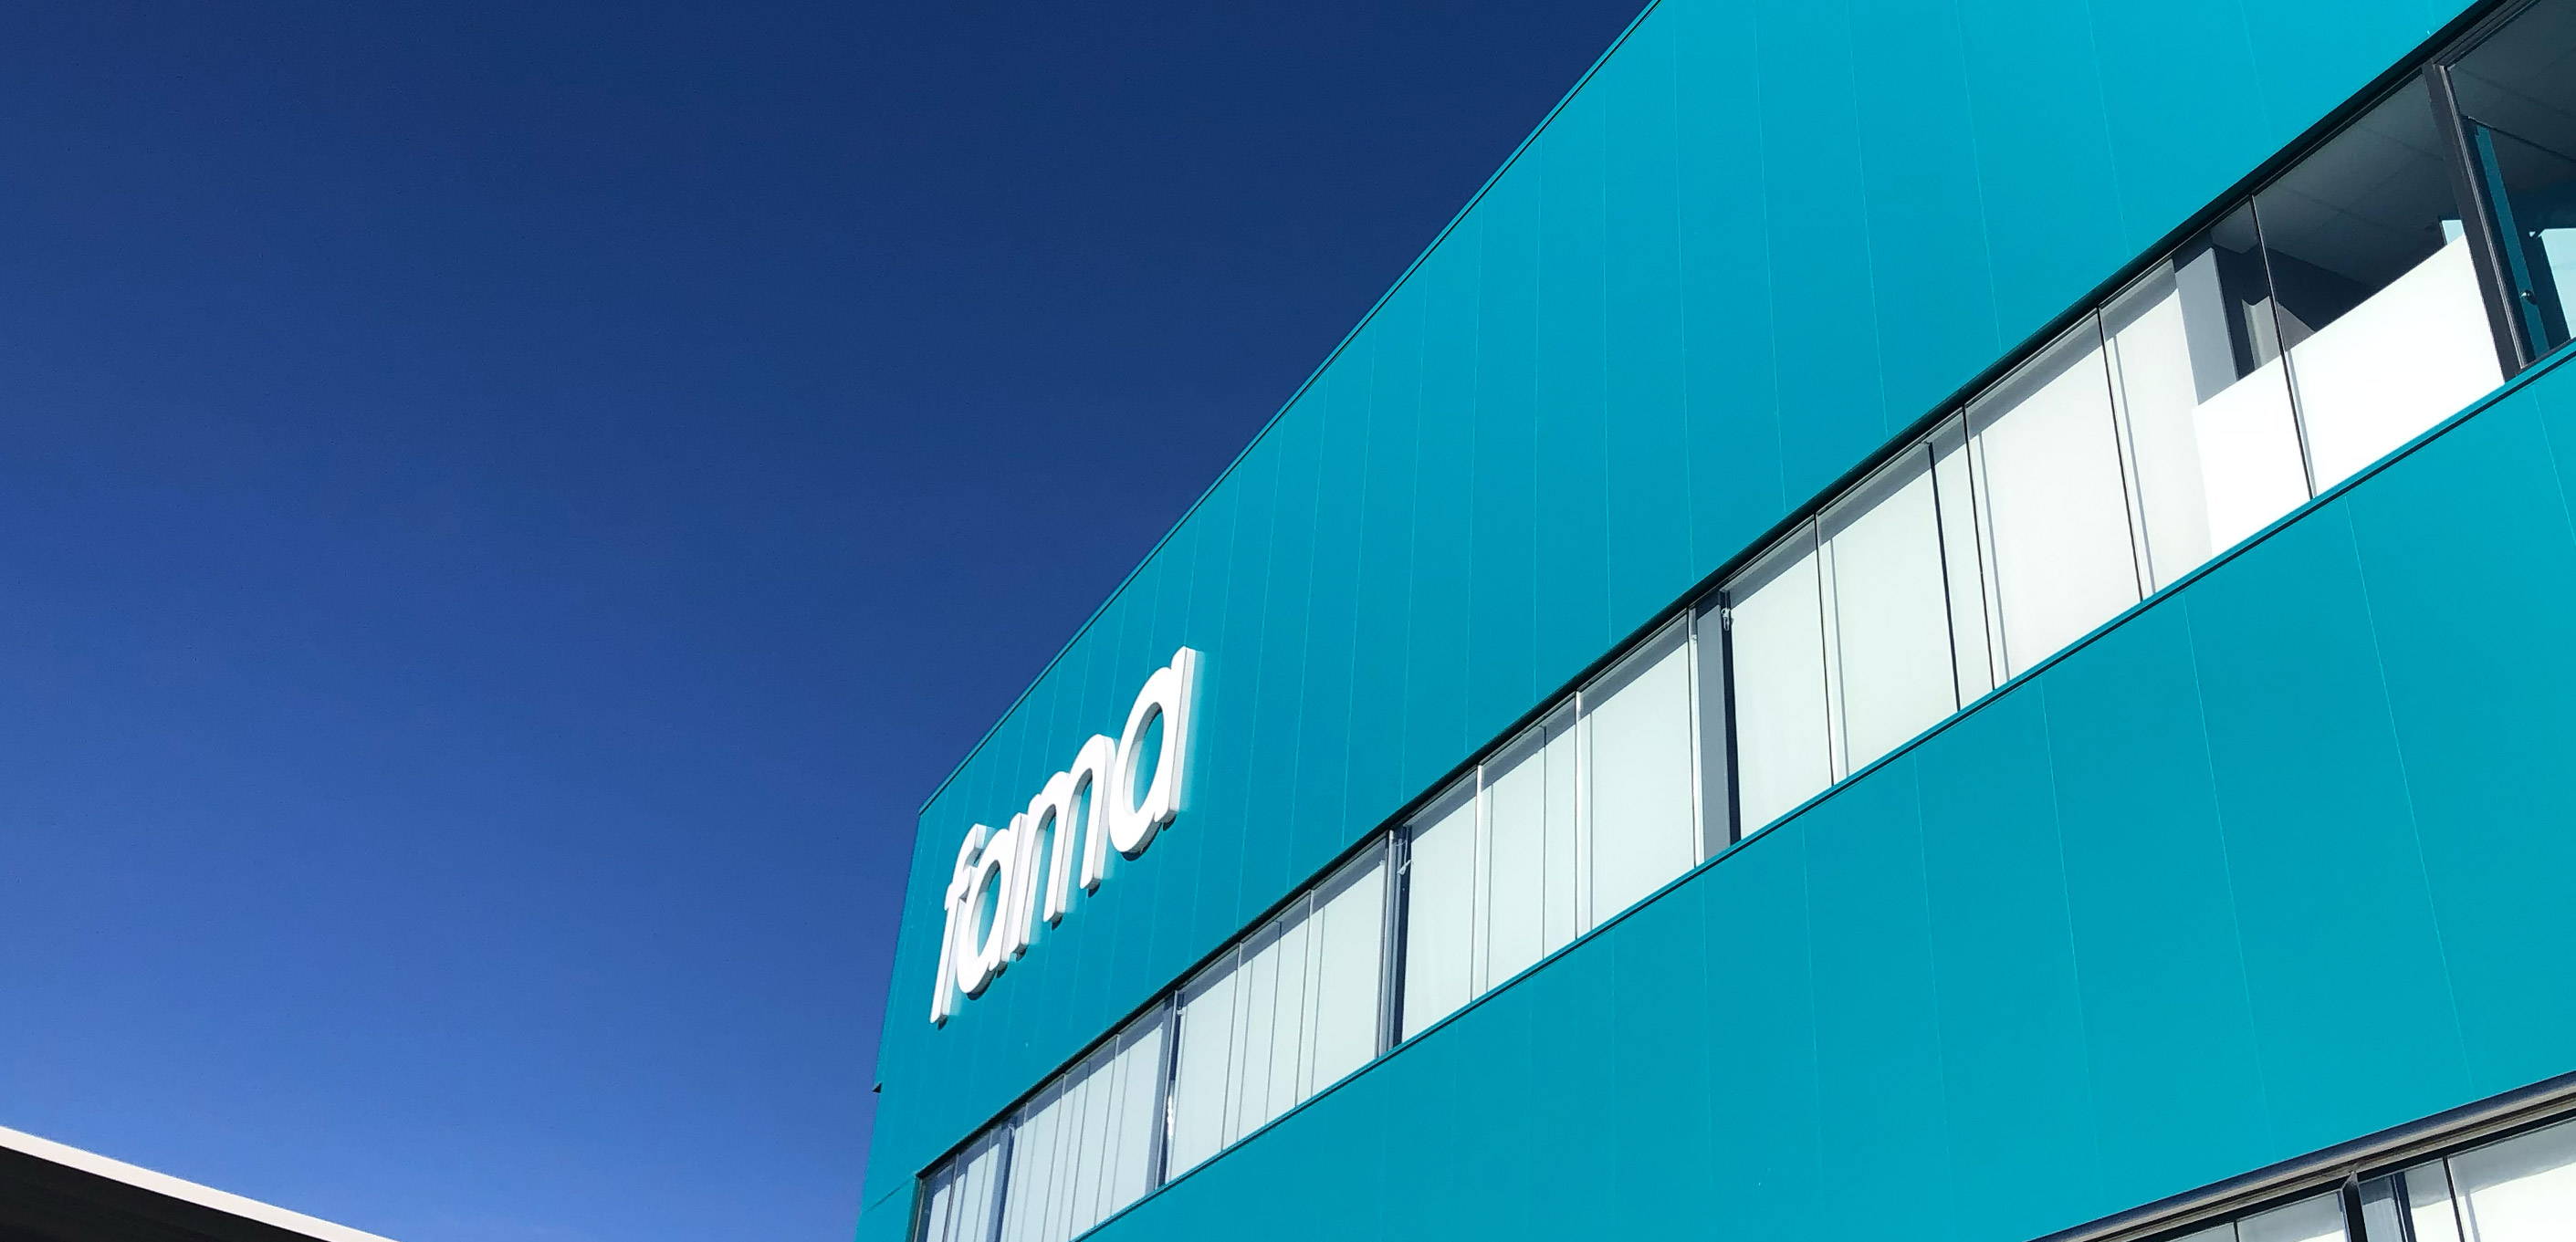 Photos from our visit to Fama's headquarters in Spain.